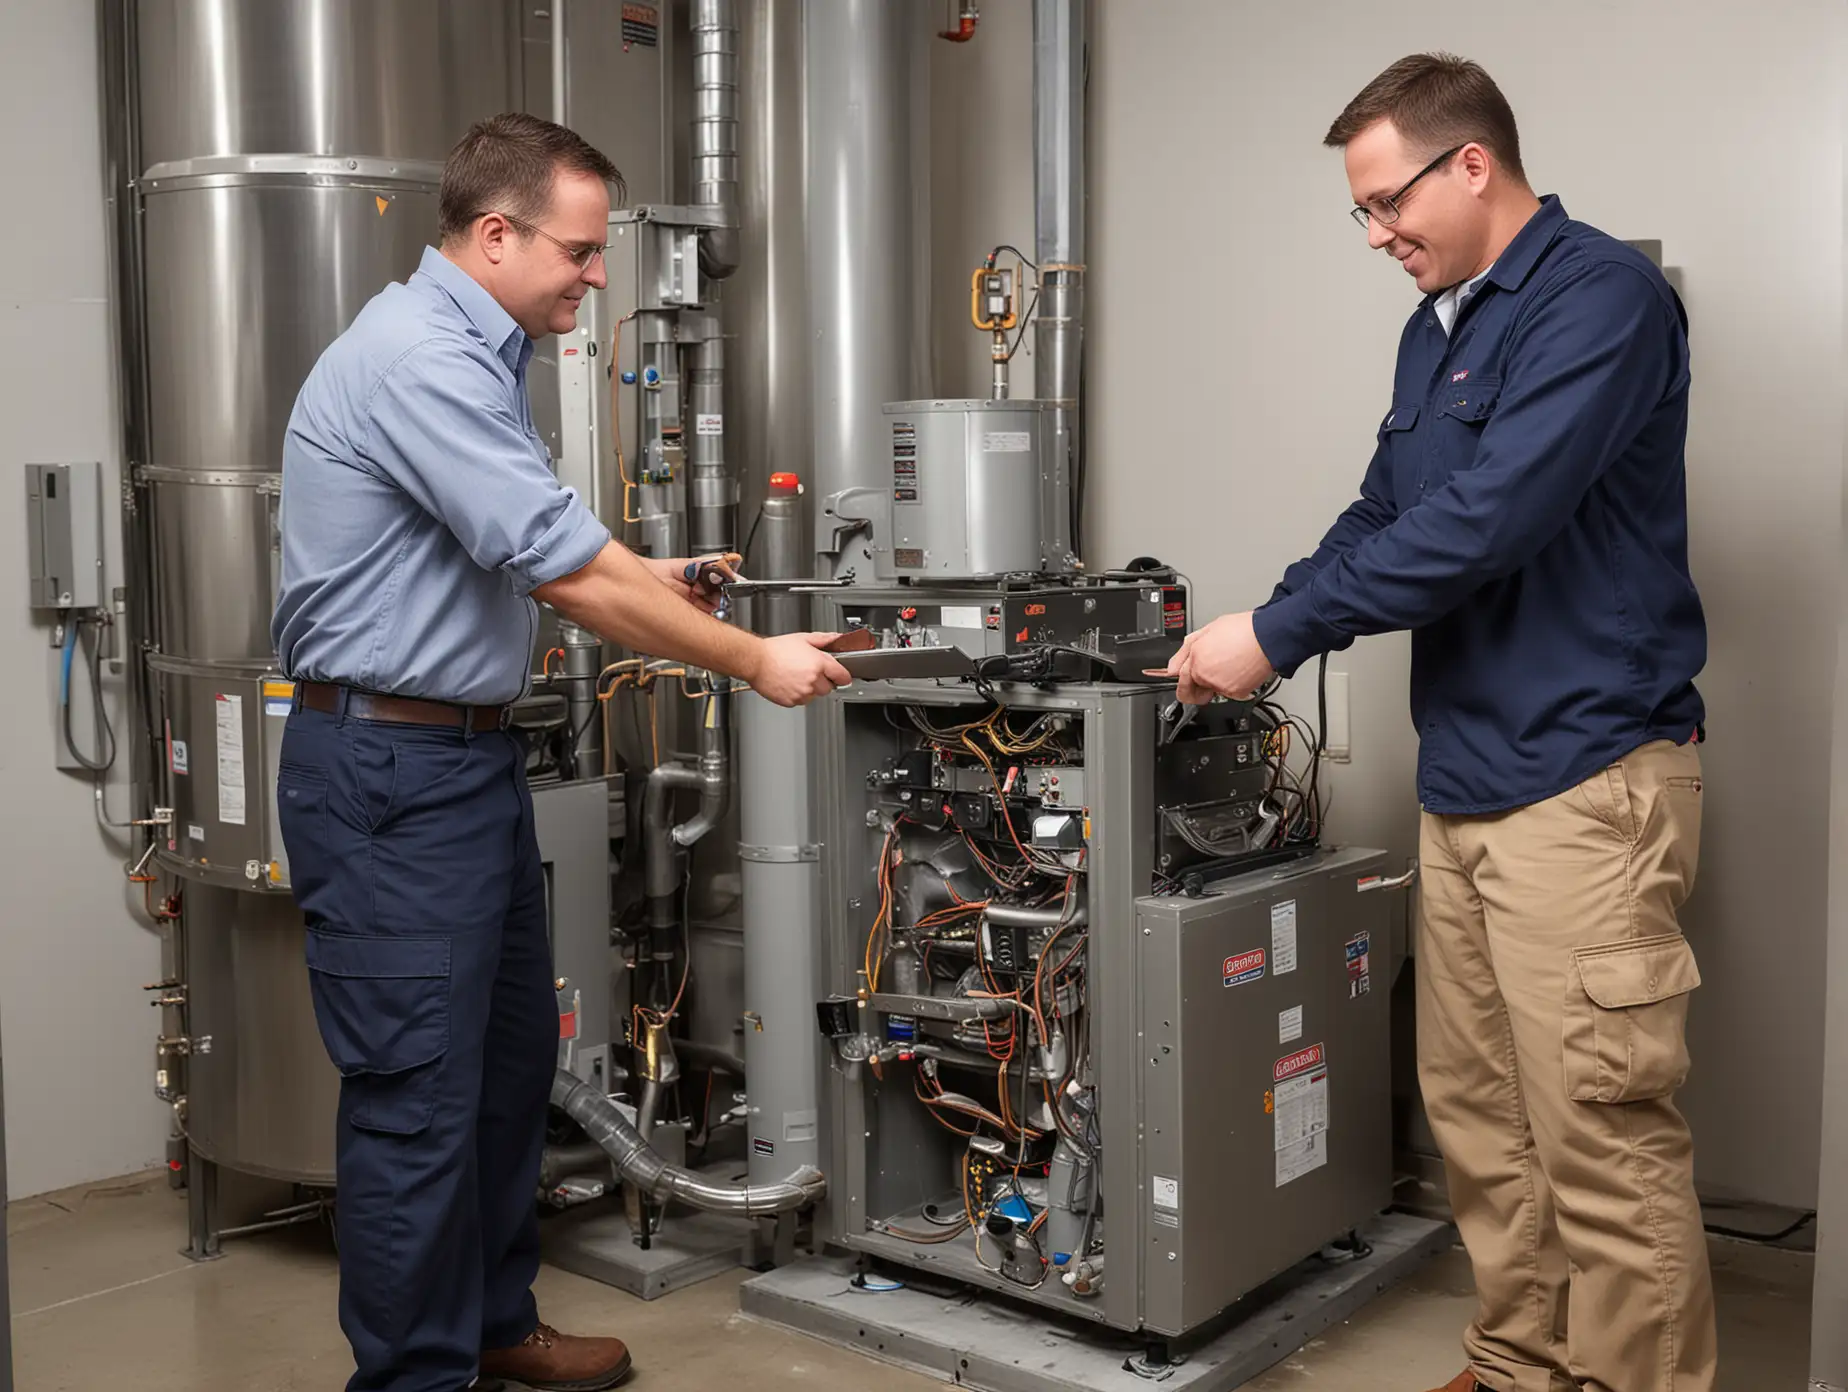 American Workers Providing Furnace Services